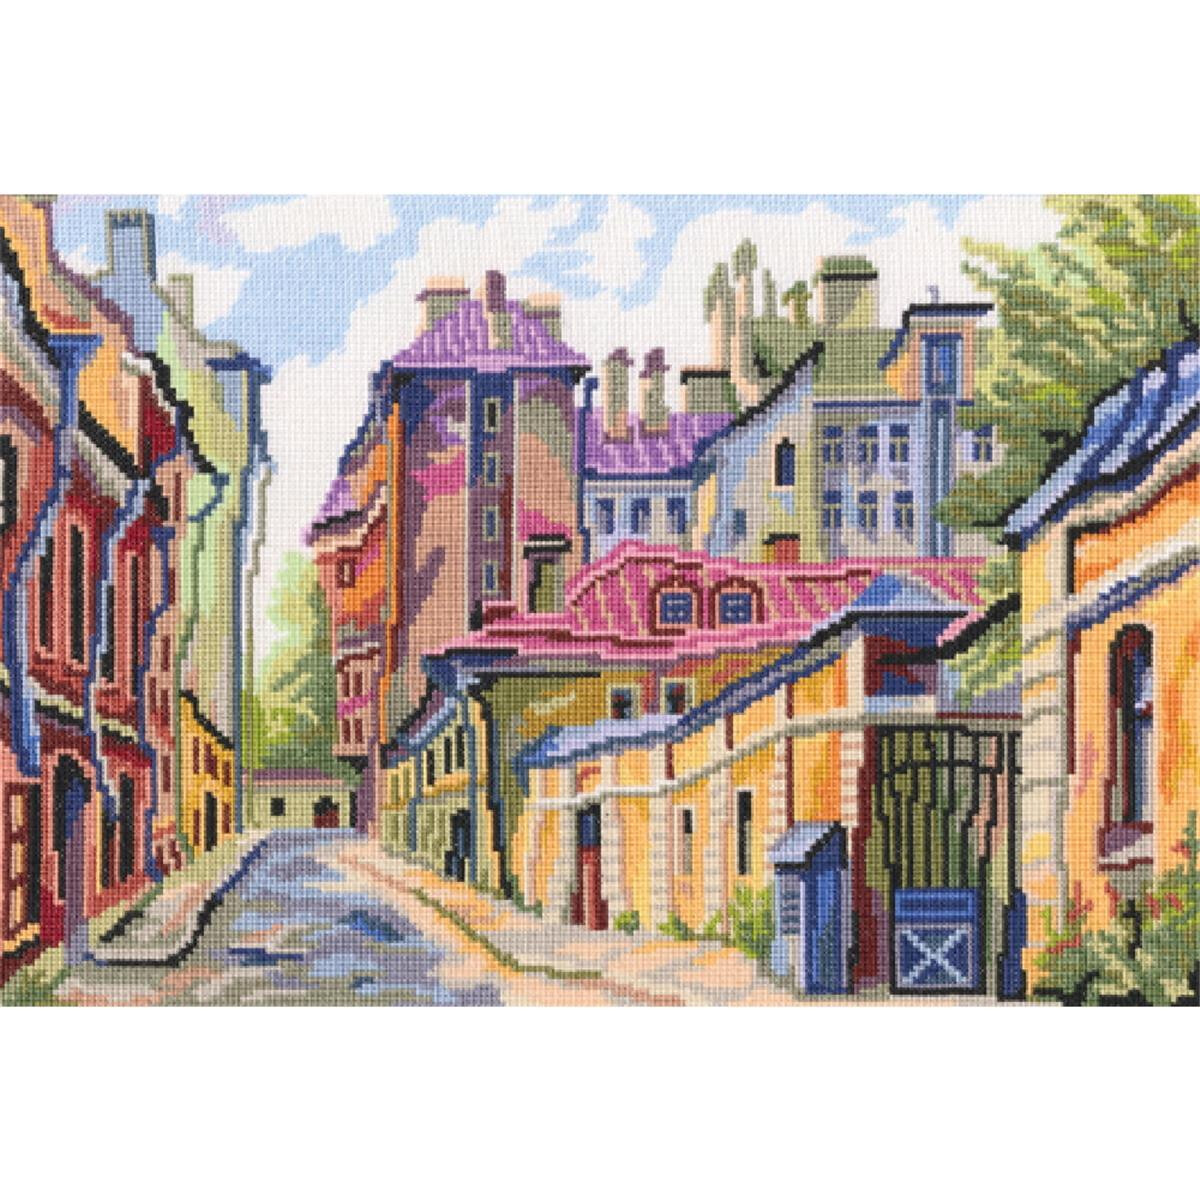 RTO counted Cross Stitch Kit "Alleys" M487,...